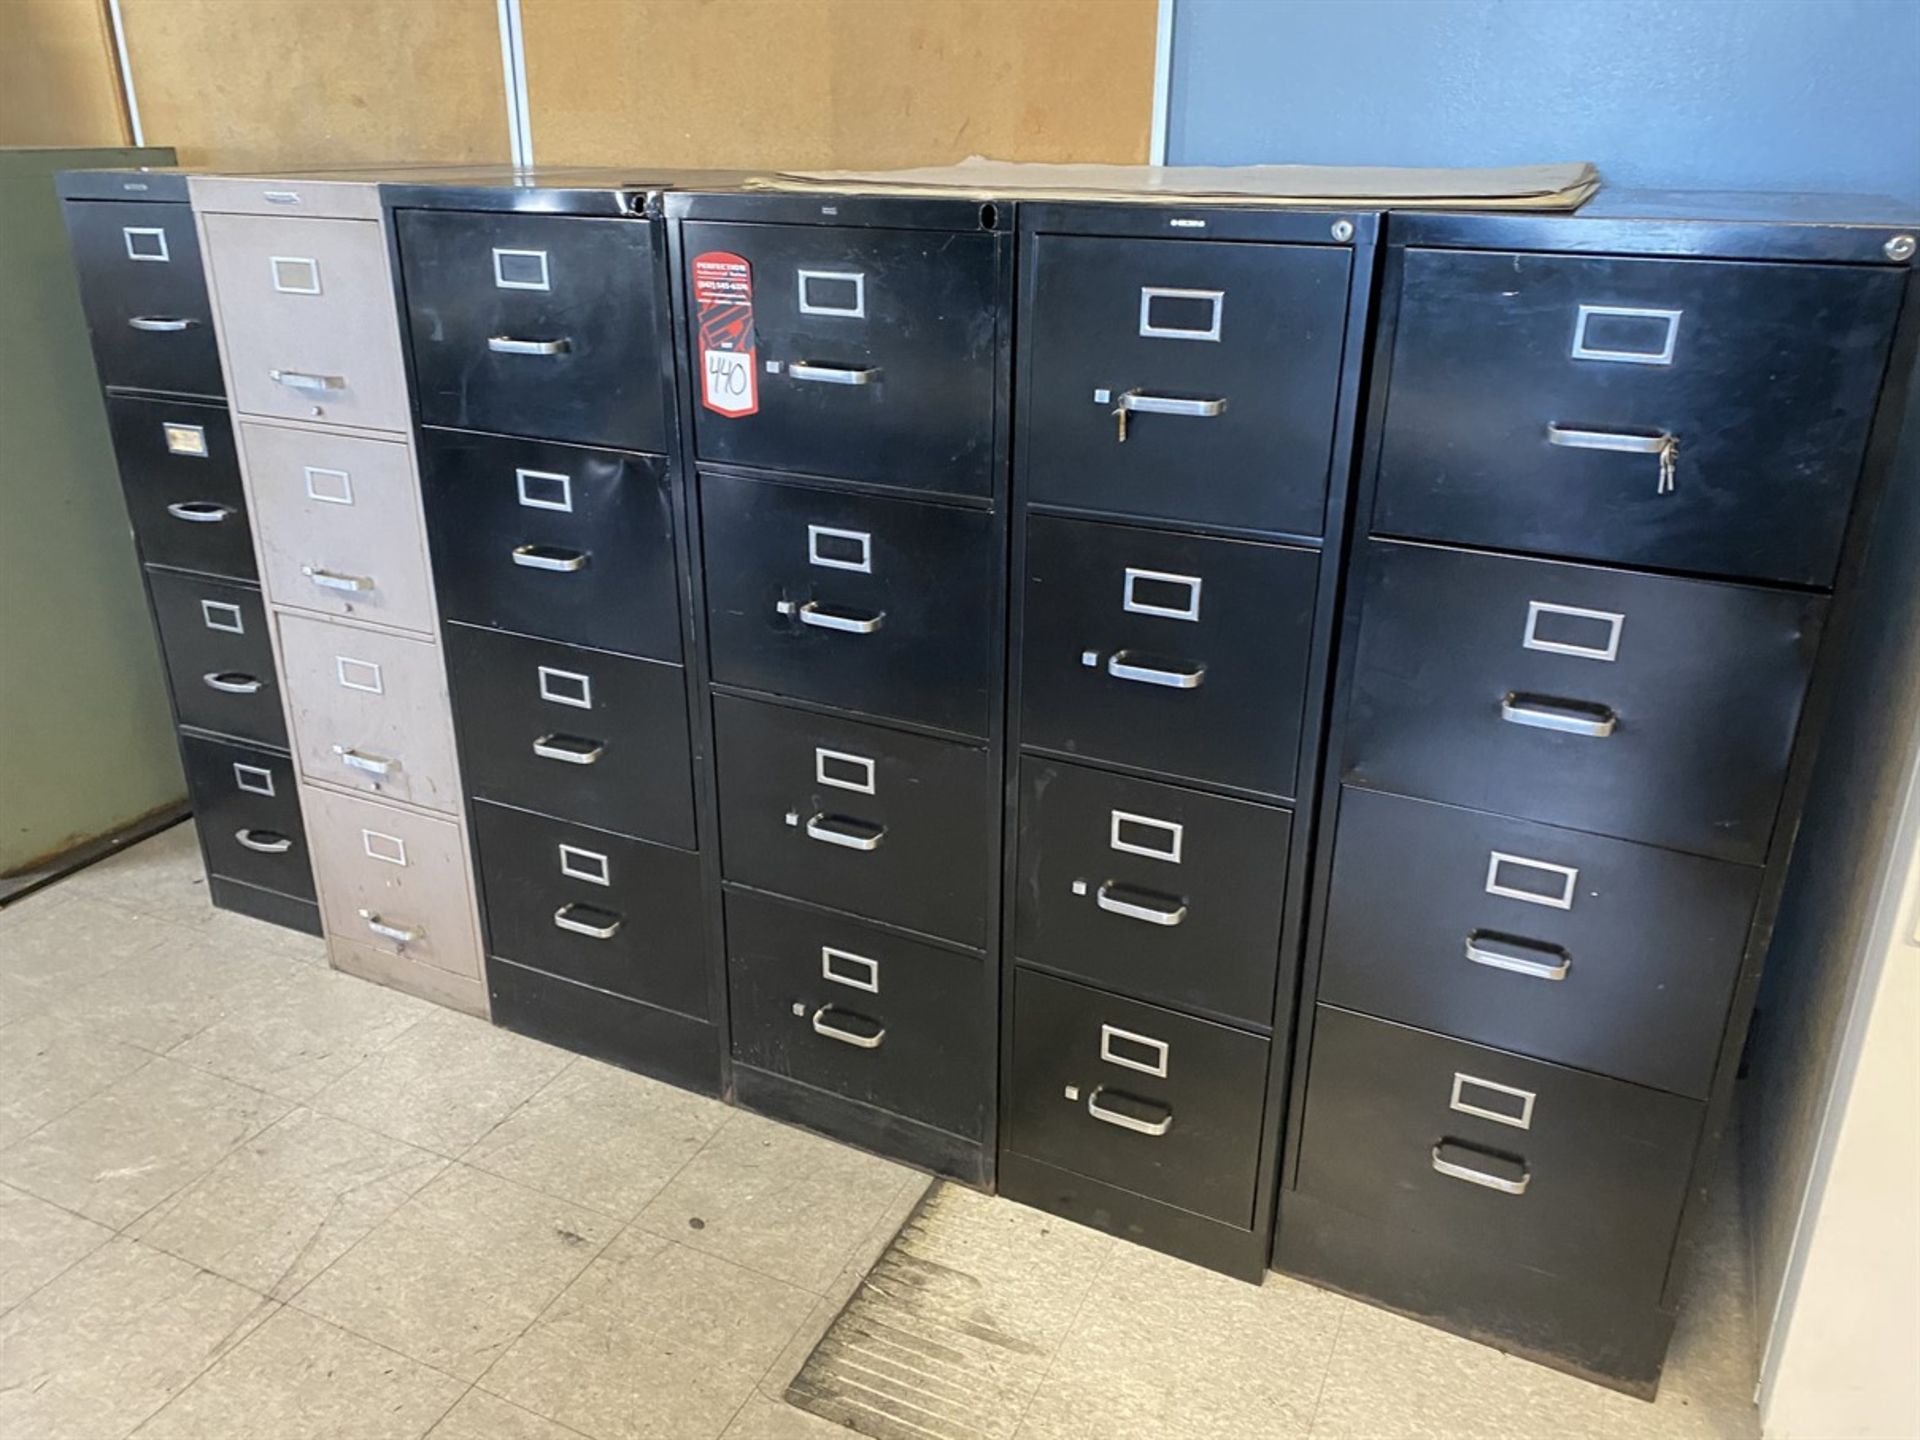 Lot of File Cabinets